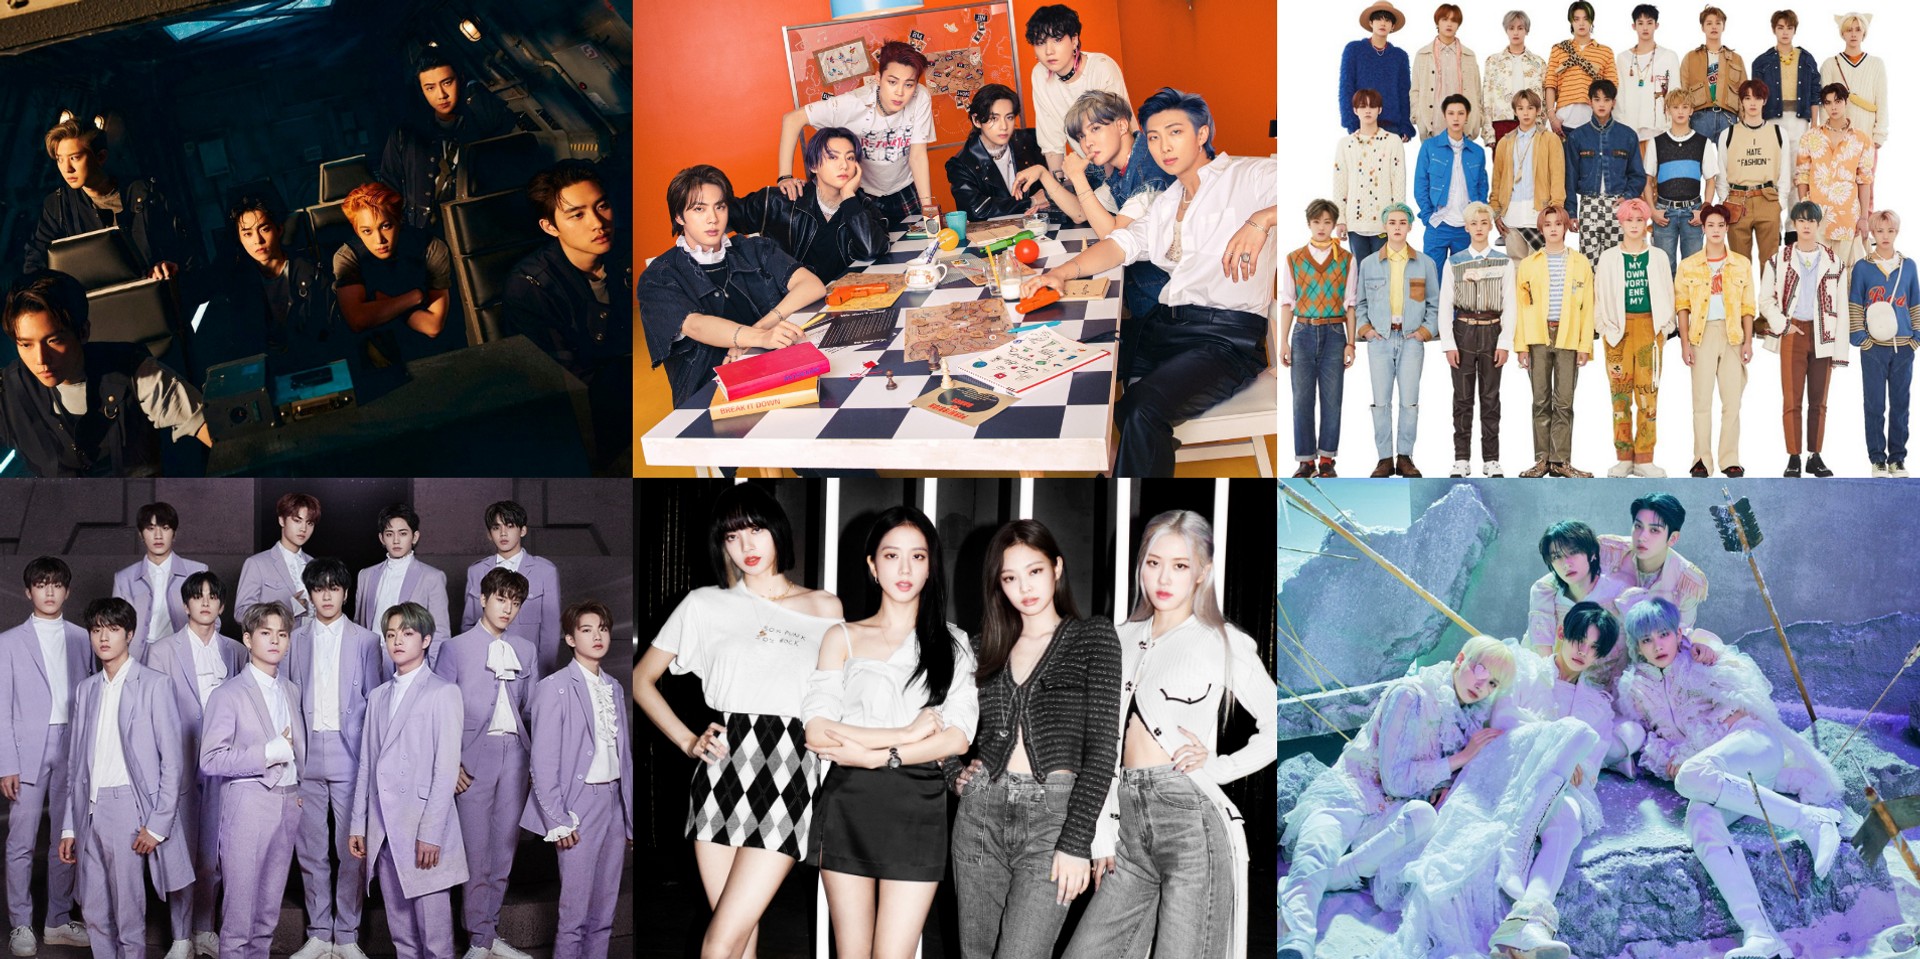 BTS, NCT, BLACKPINK, EXO, TREASURE, TXT, and more are the most-talked-about K-pop acts on Twitter